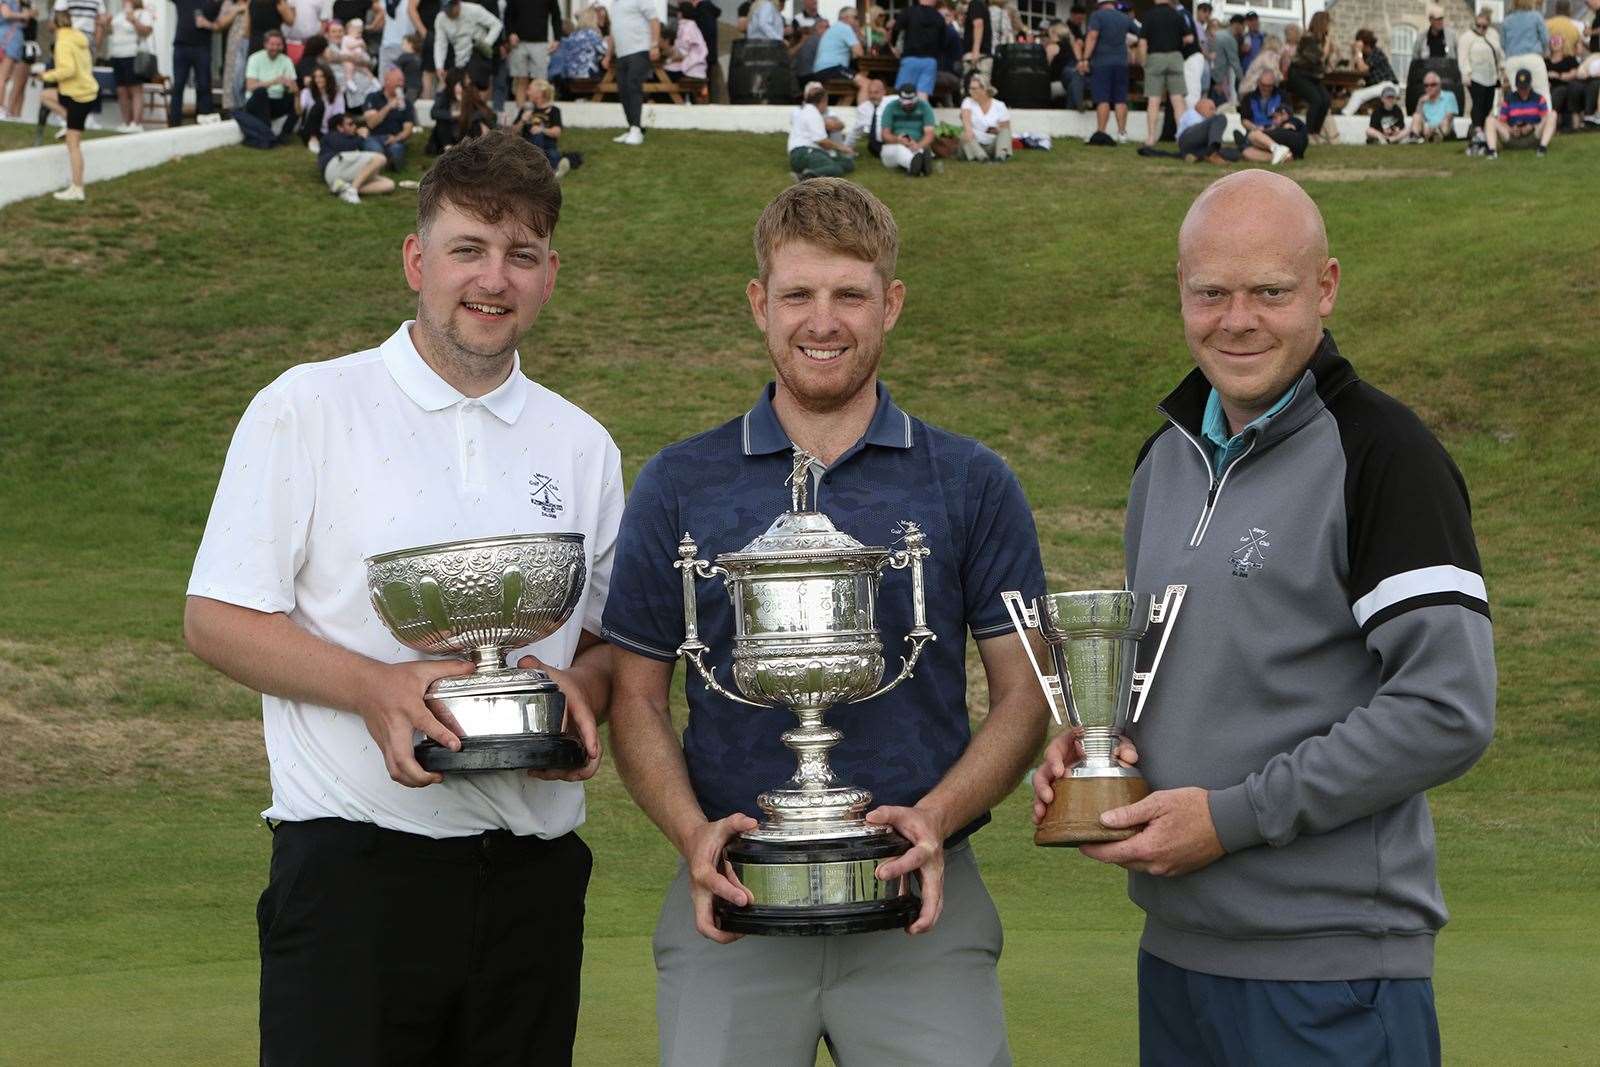 From left: Jack McNeilly, Craig Smith and Shaun Heyes with their trophies. Picture: John MacGregor